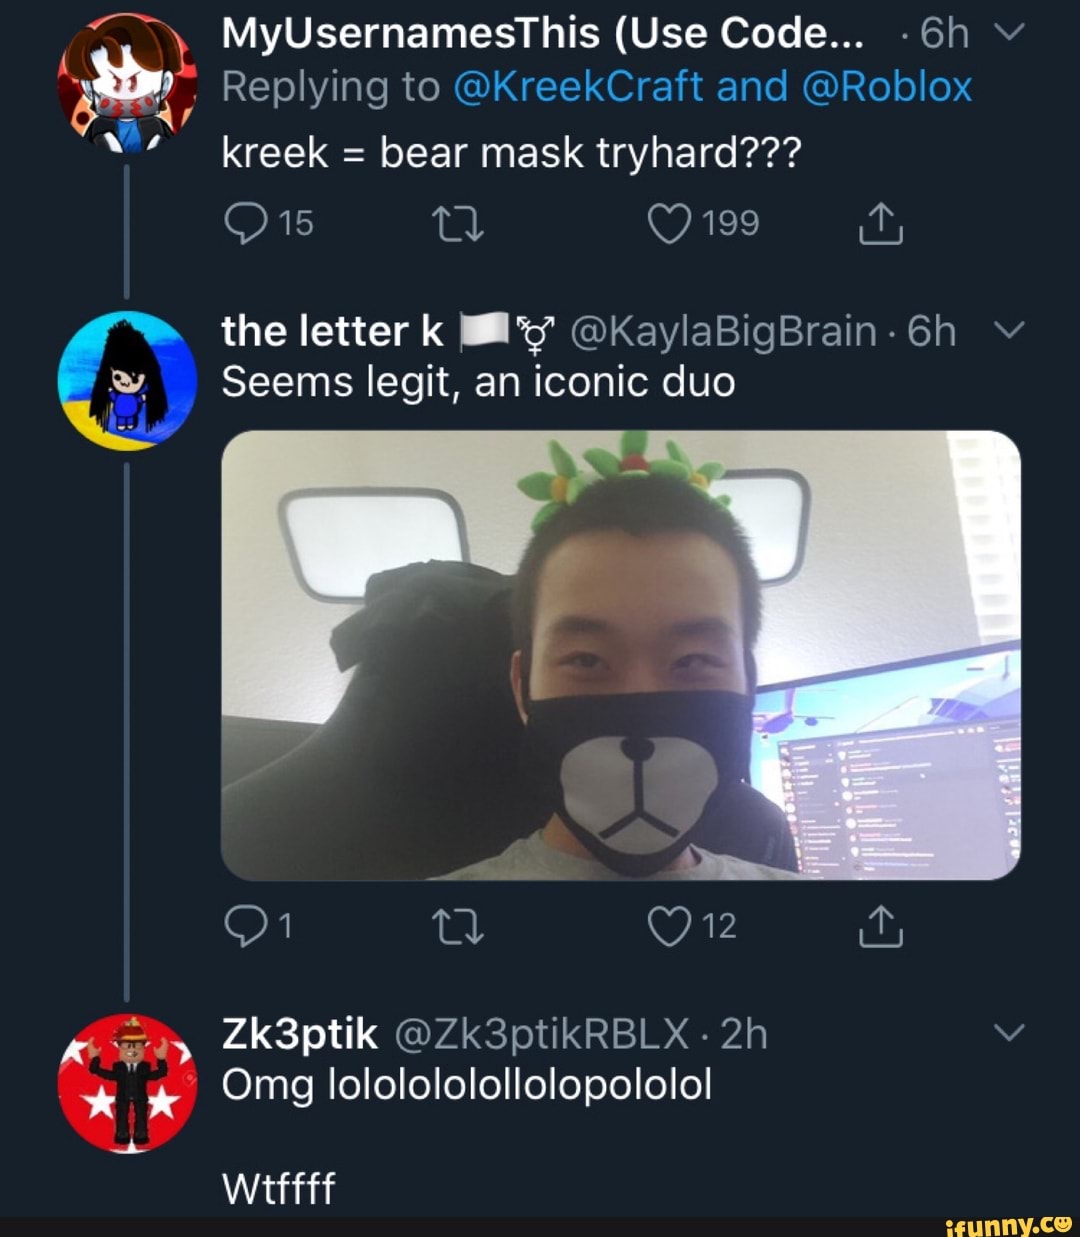 Myusernamesthis Use Code 6h Replying To Kreekcraft And Roblox Kreek Bear Mask Tryhard The Letter K By Okaylabigbrain 6h Y Seems Legit An Iconic Duo Omg Lololololollolopololo Ifunny - myusernamesthis roblox